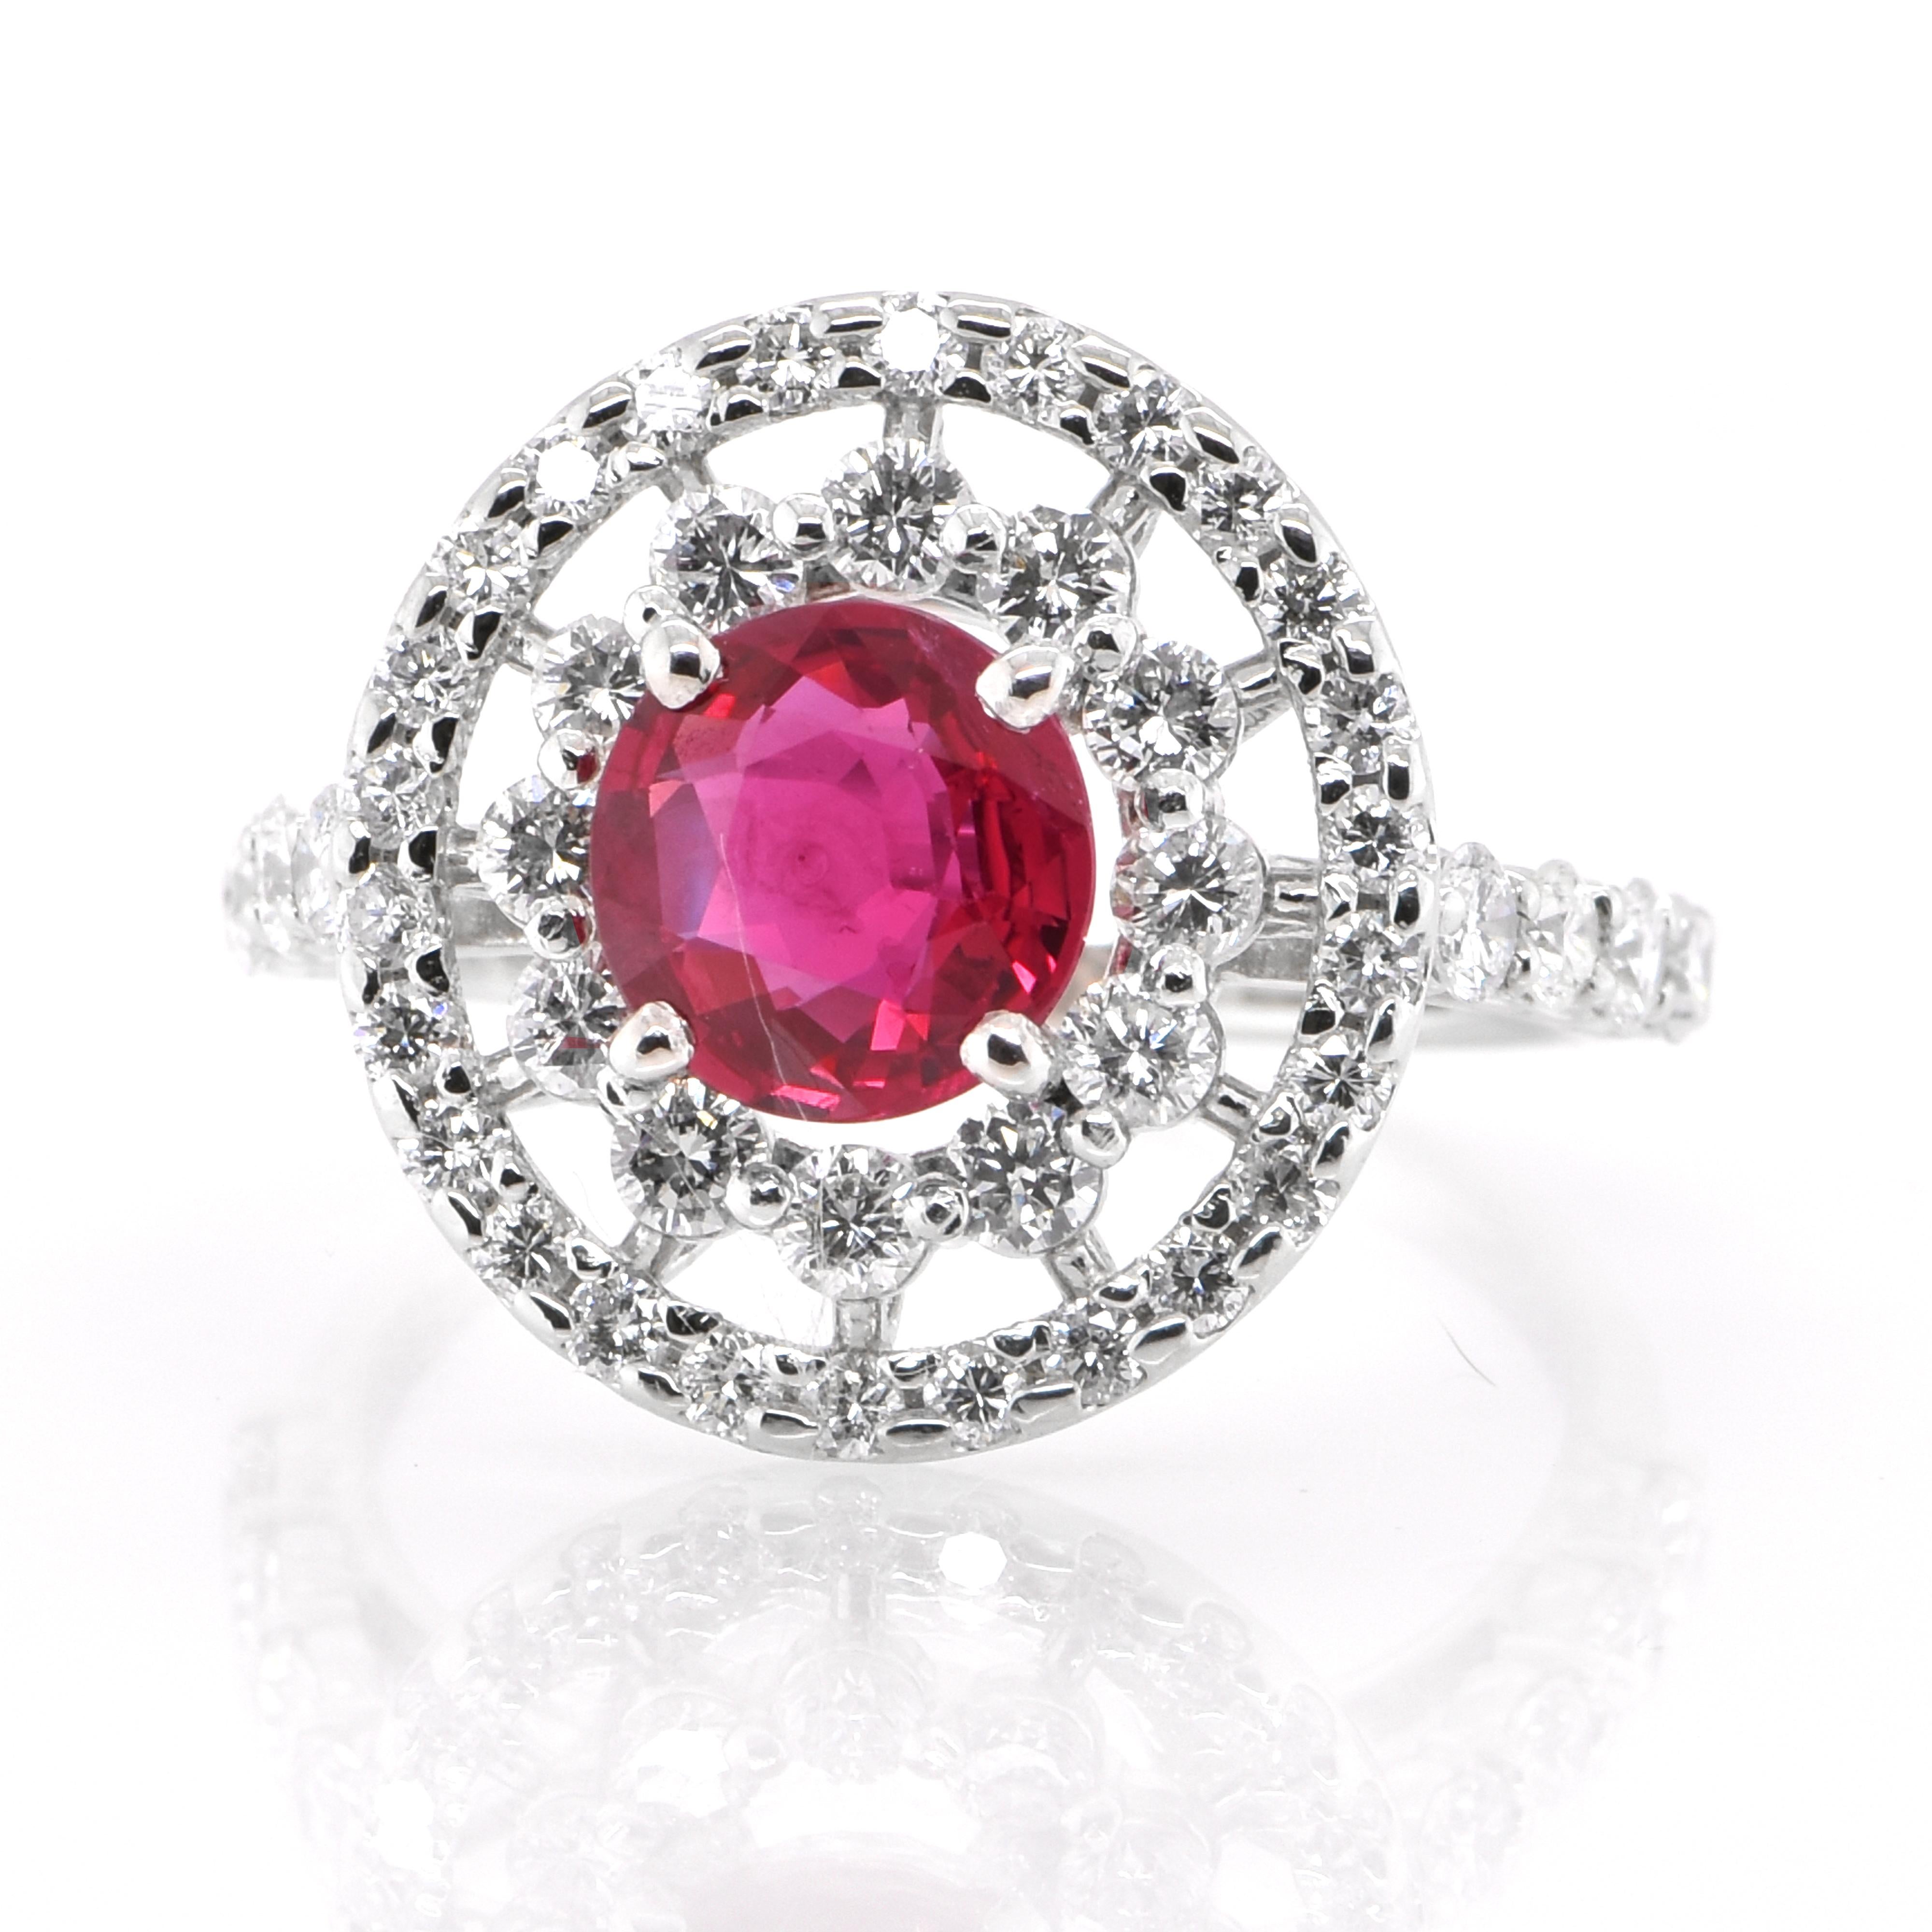 A beautiful ring set in Platinum featuring a GIA Certified 1.28 Carat Natural Siam (Thailand) Ruby and 1.18 Carat Diamonds. Rubies are referred to as 